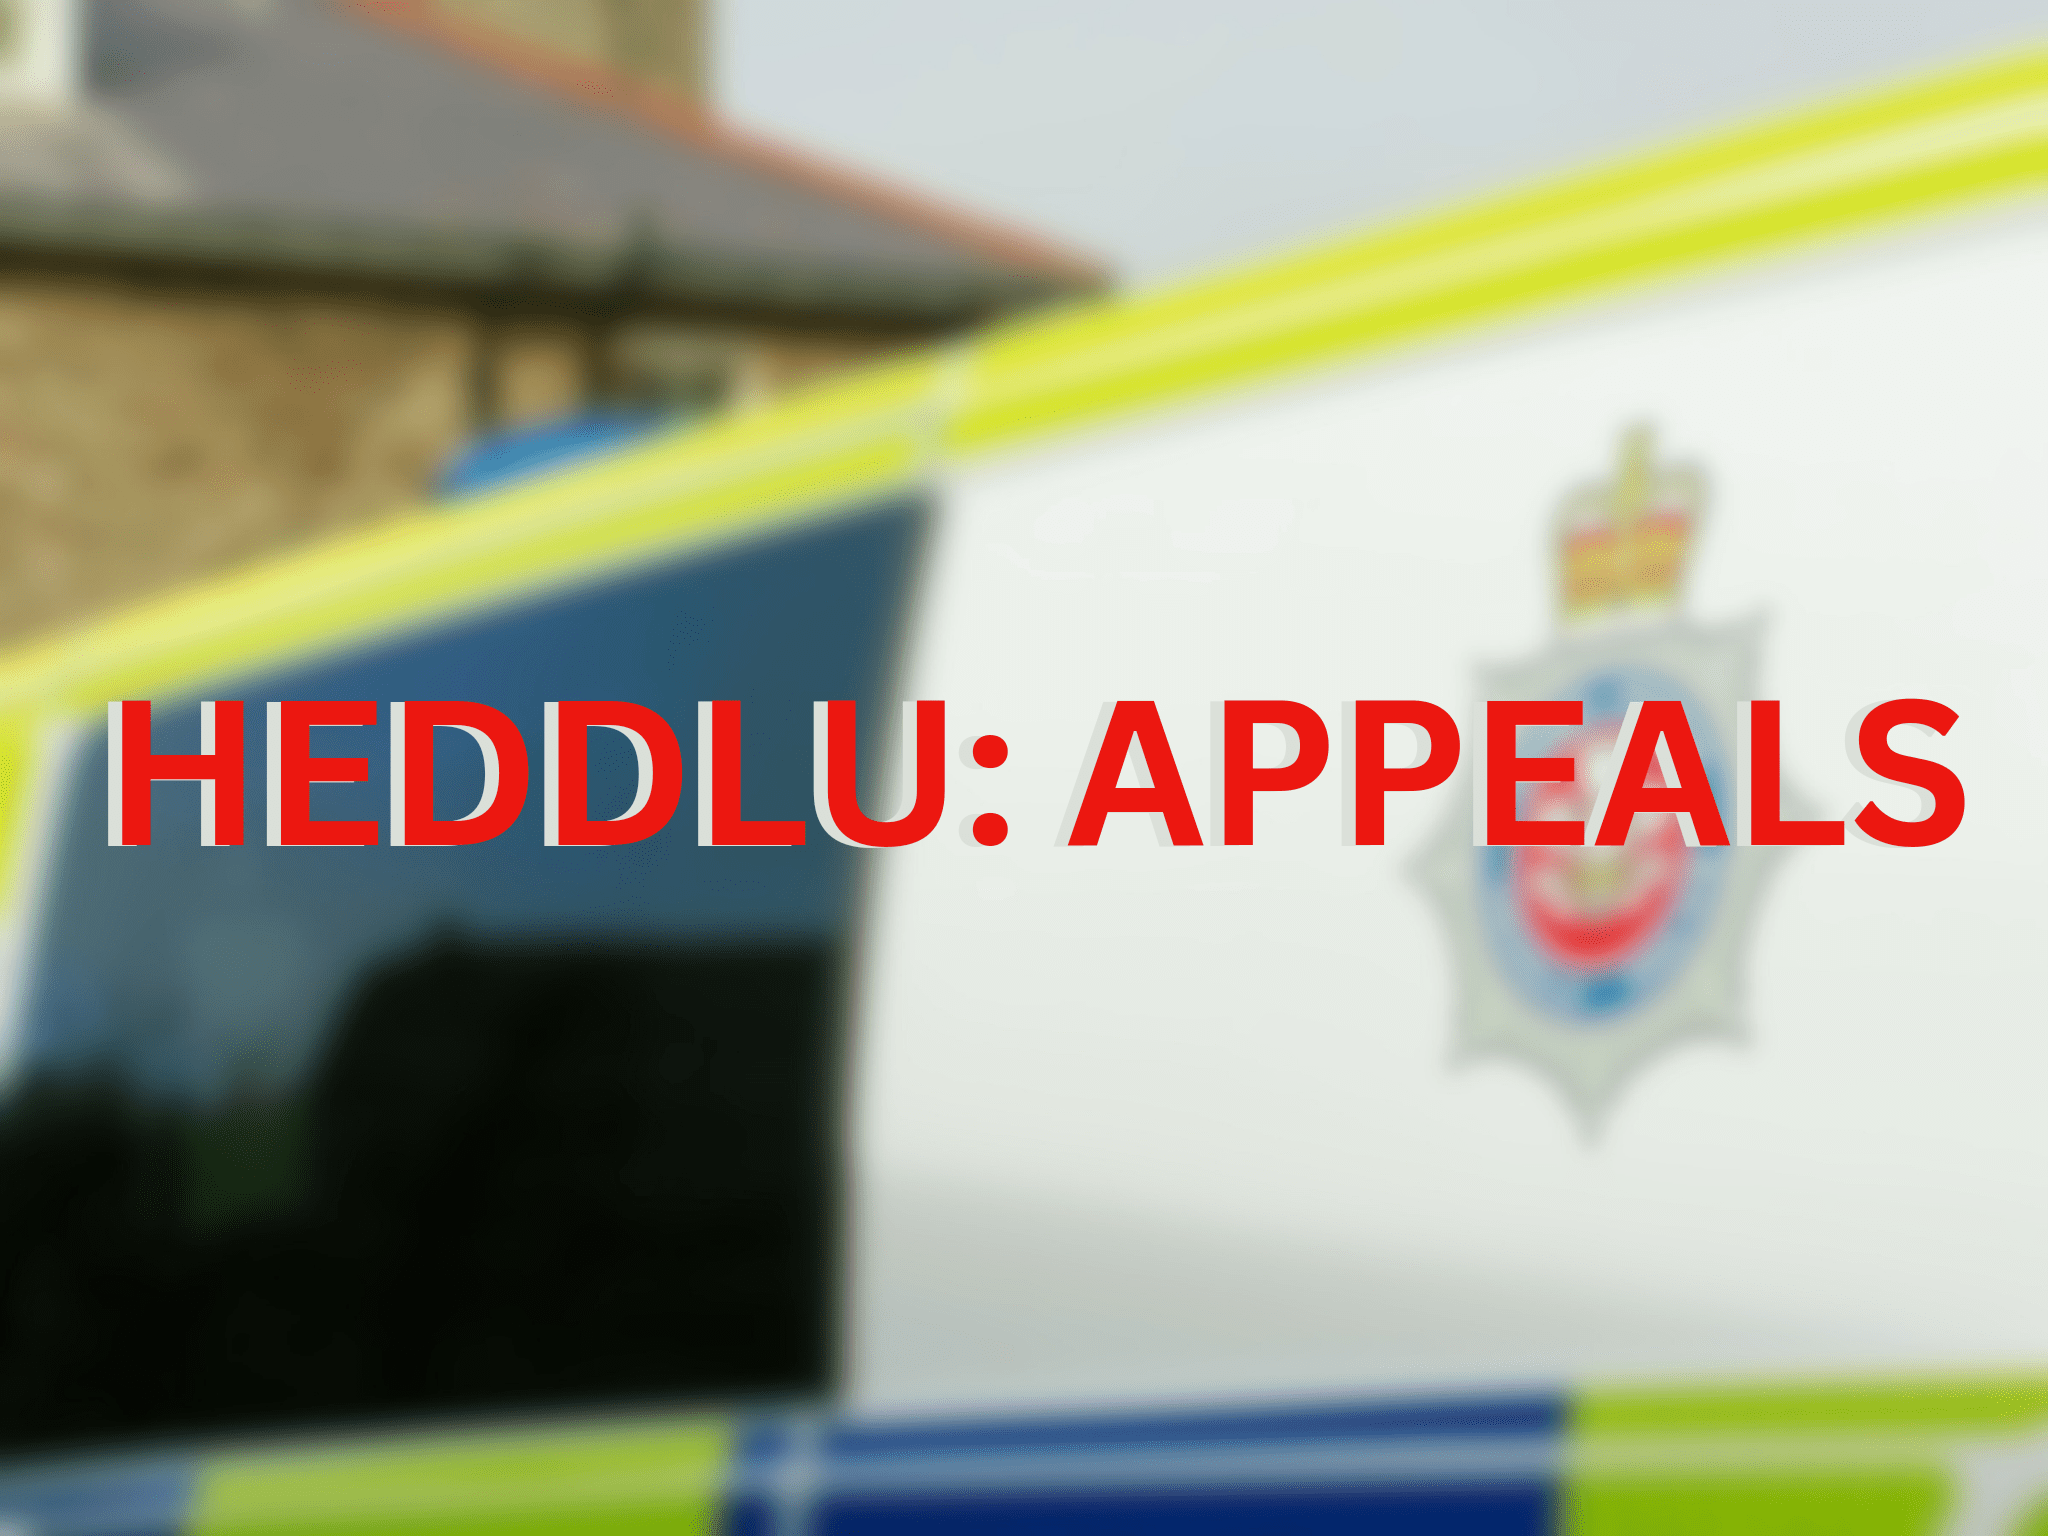 Police  appeal for help following road traffic collision in Kemys Inferior